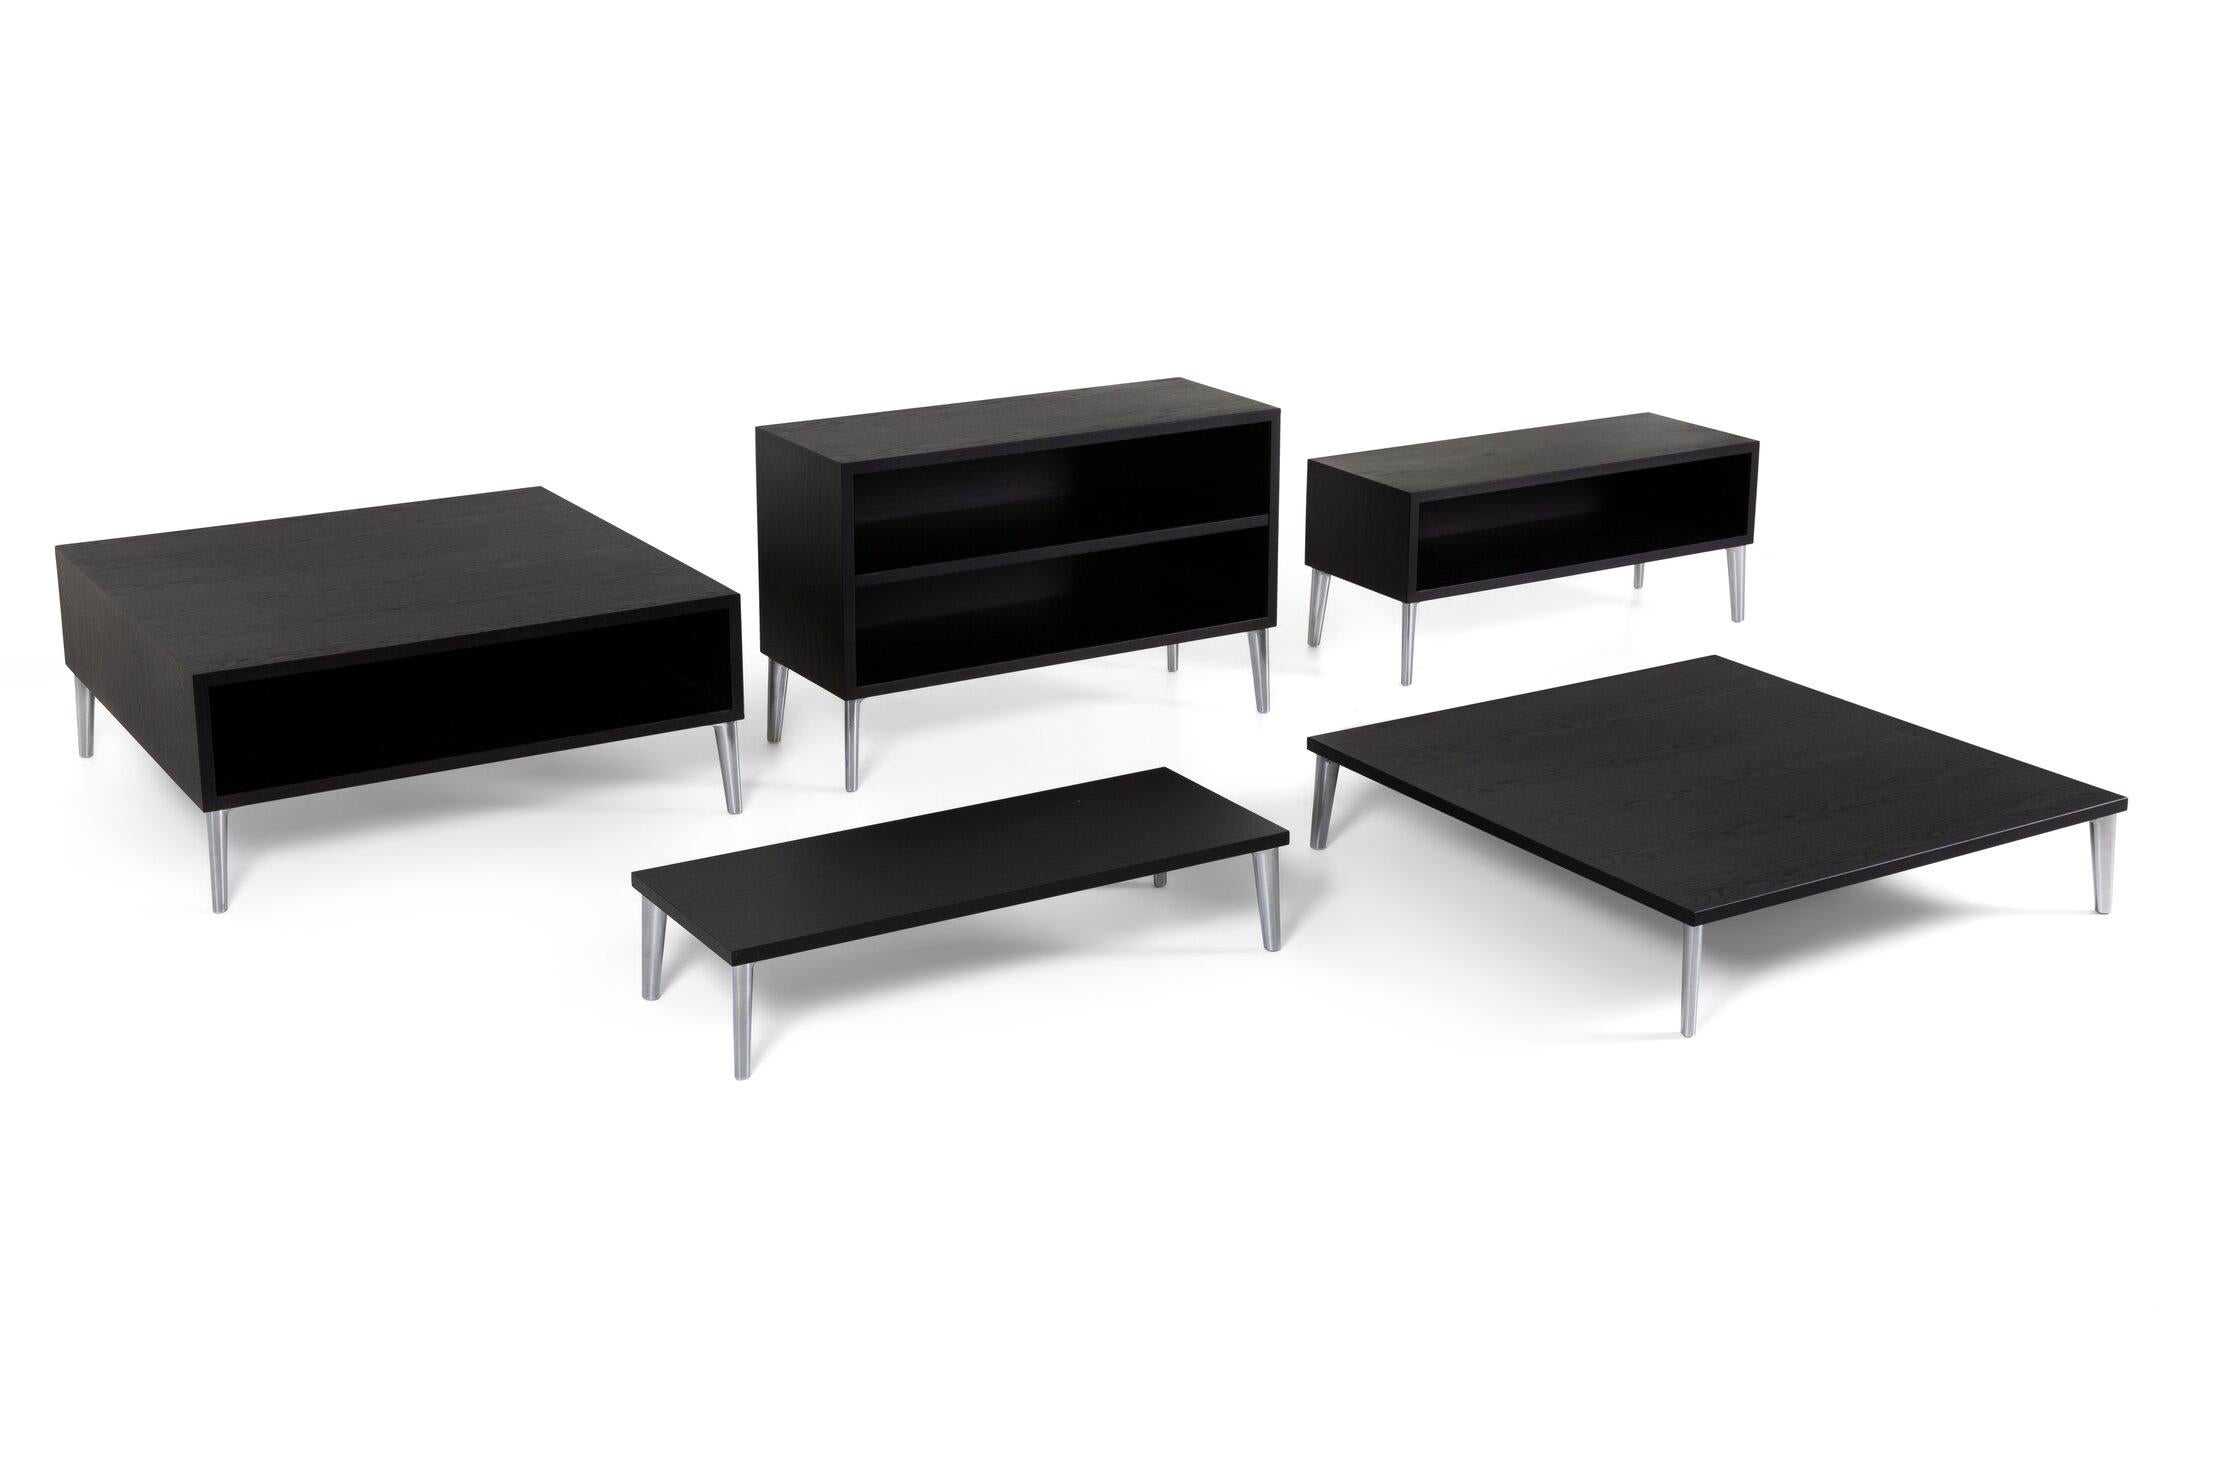 Dutch Moooi Sofa So Good Table Black Stained by by Marcel Wanders Studio For Sale